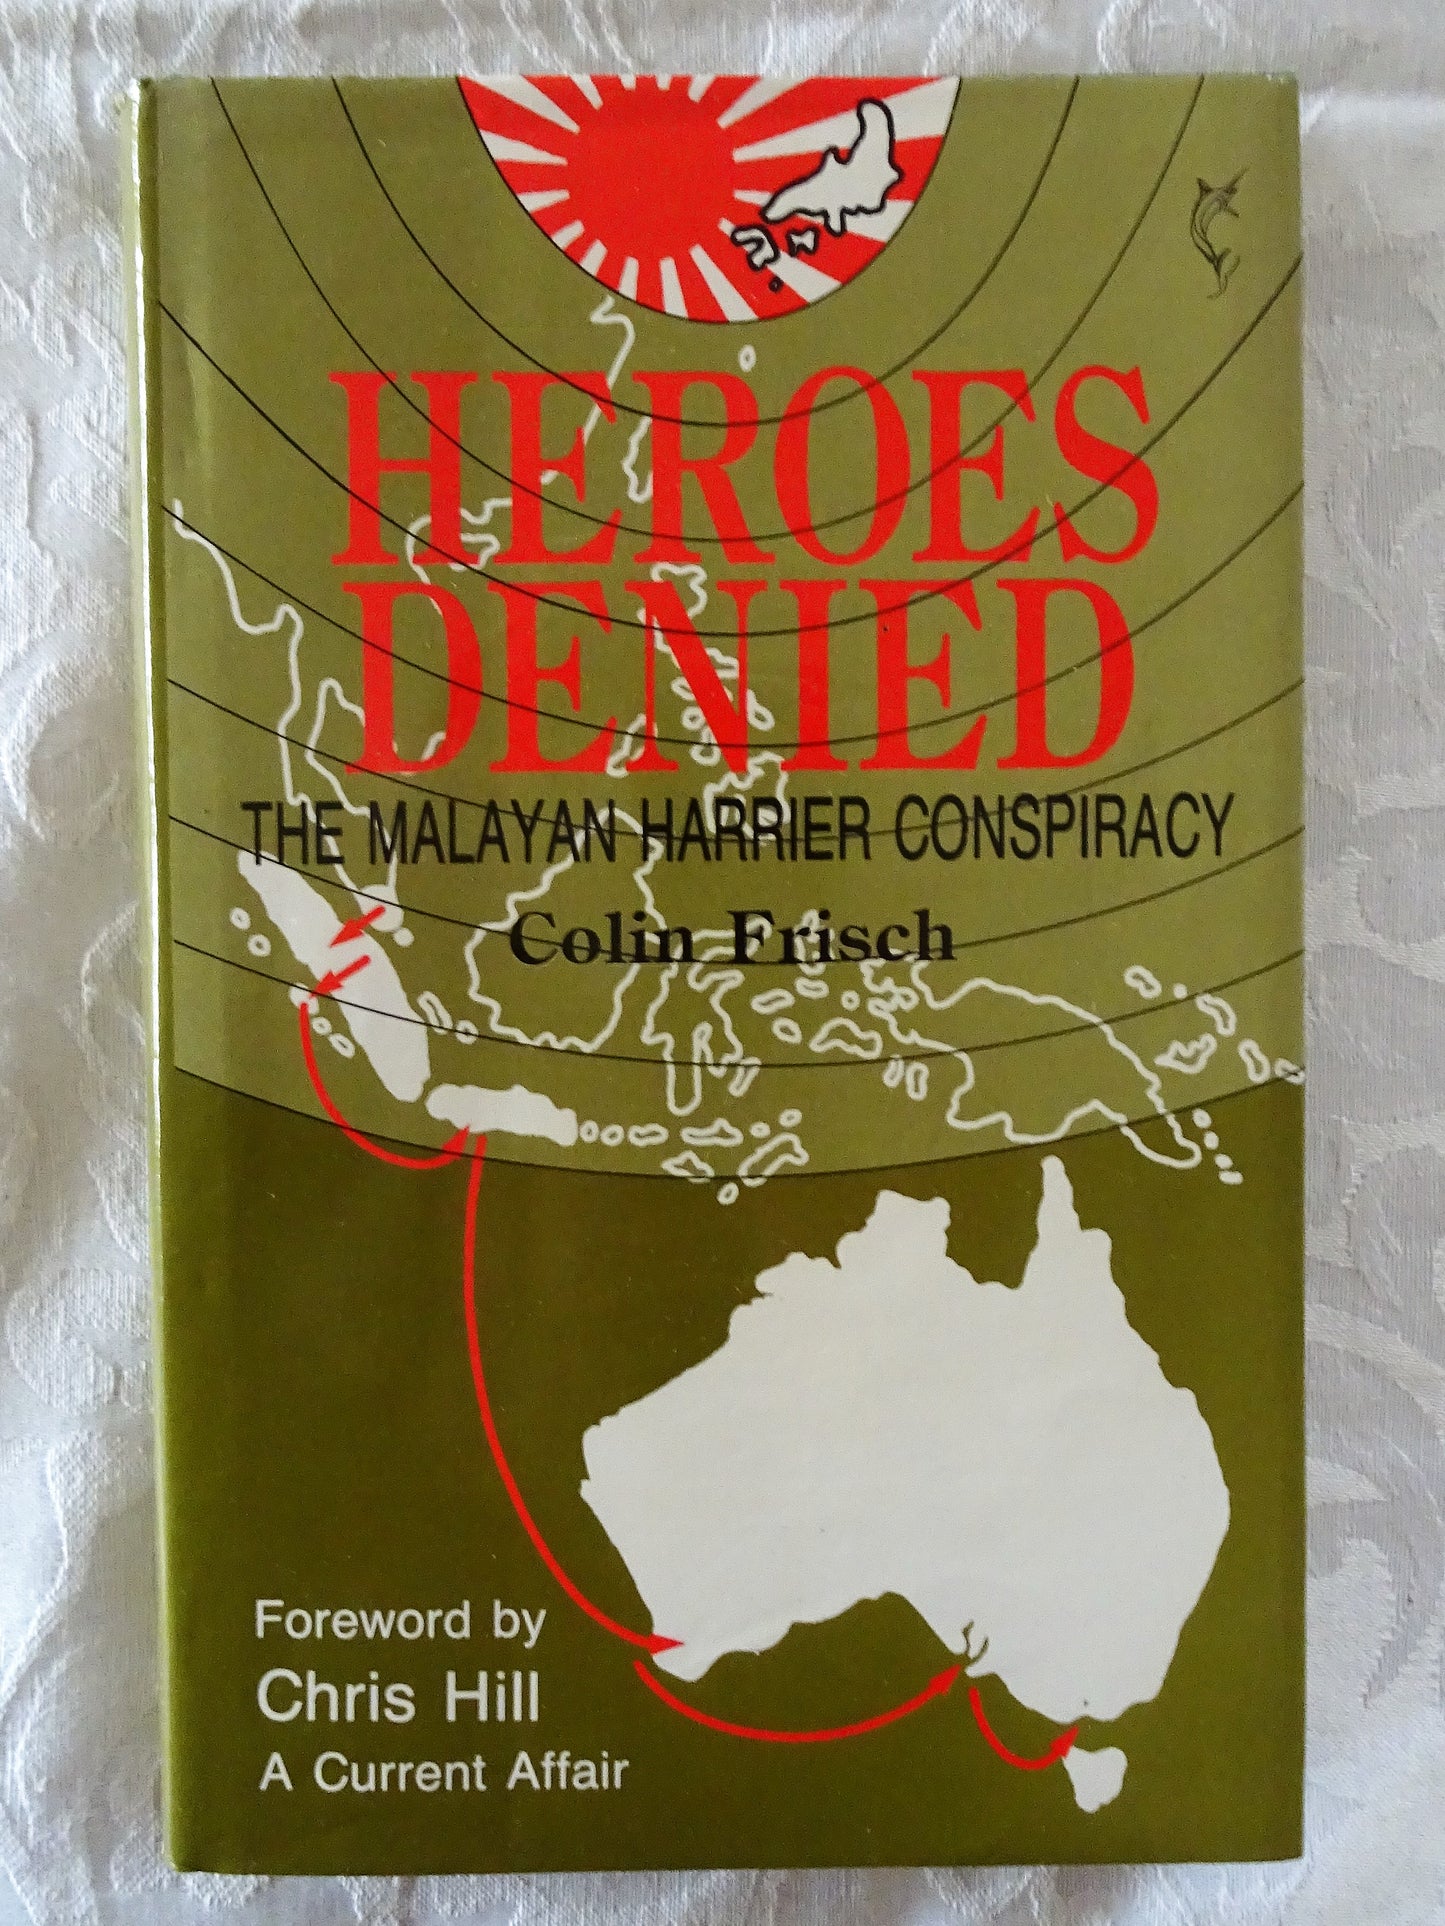 Heroes Denied by Colin Frisch